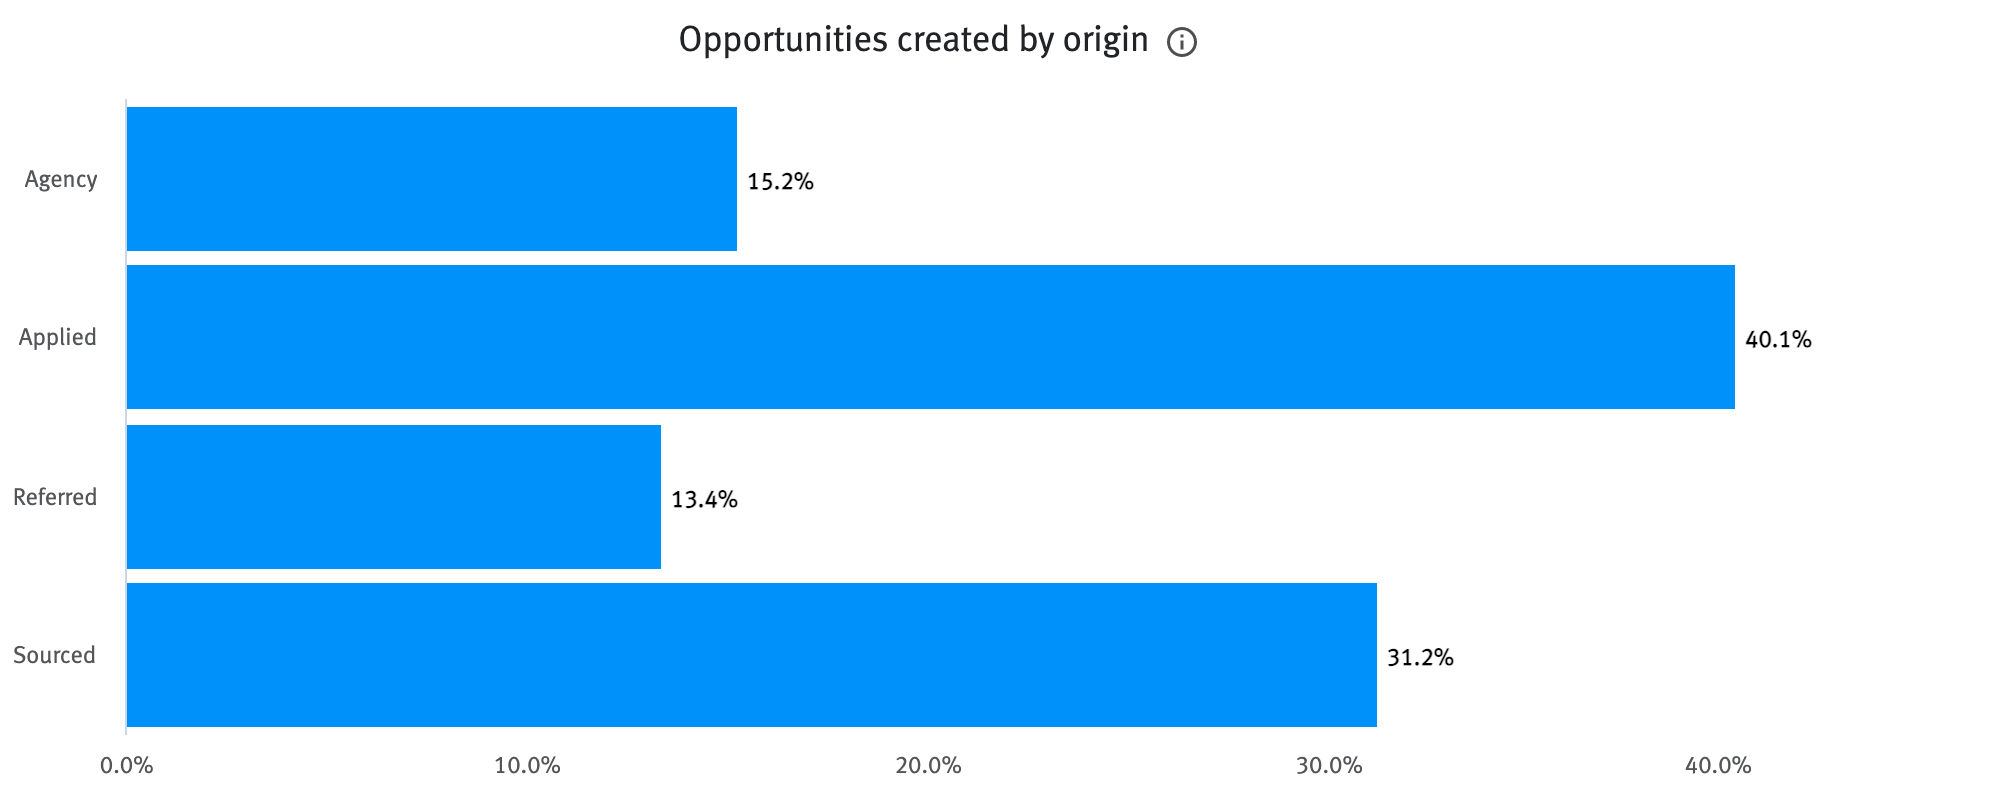 Opportunities created by origin chart